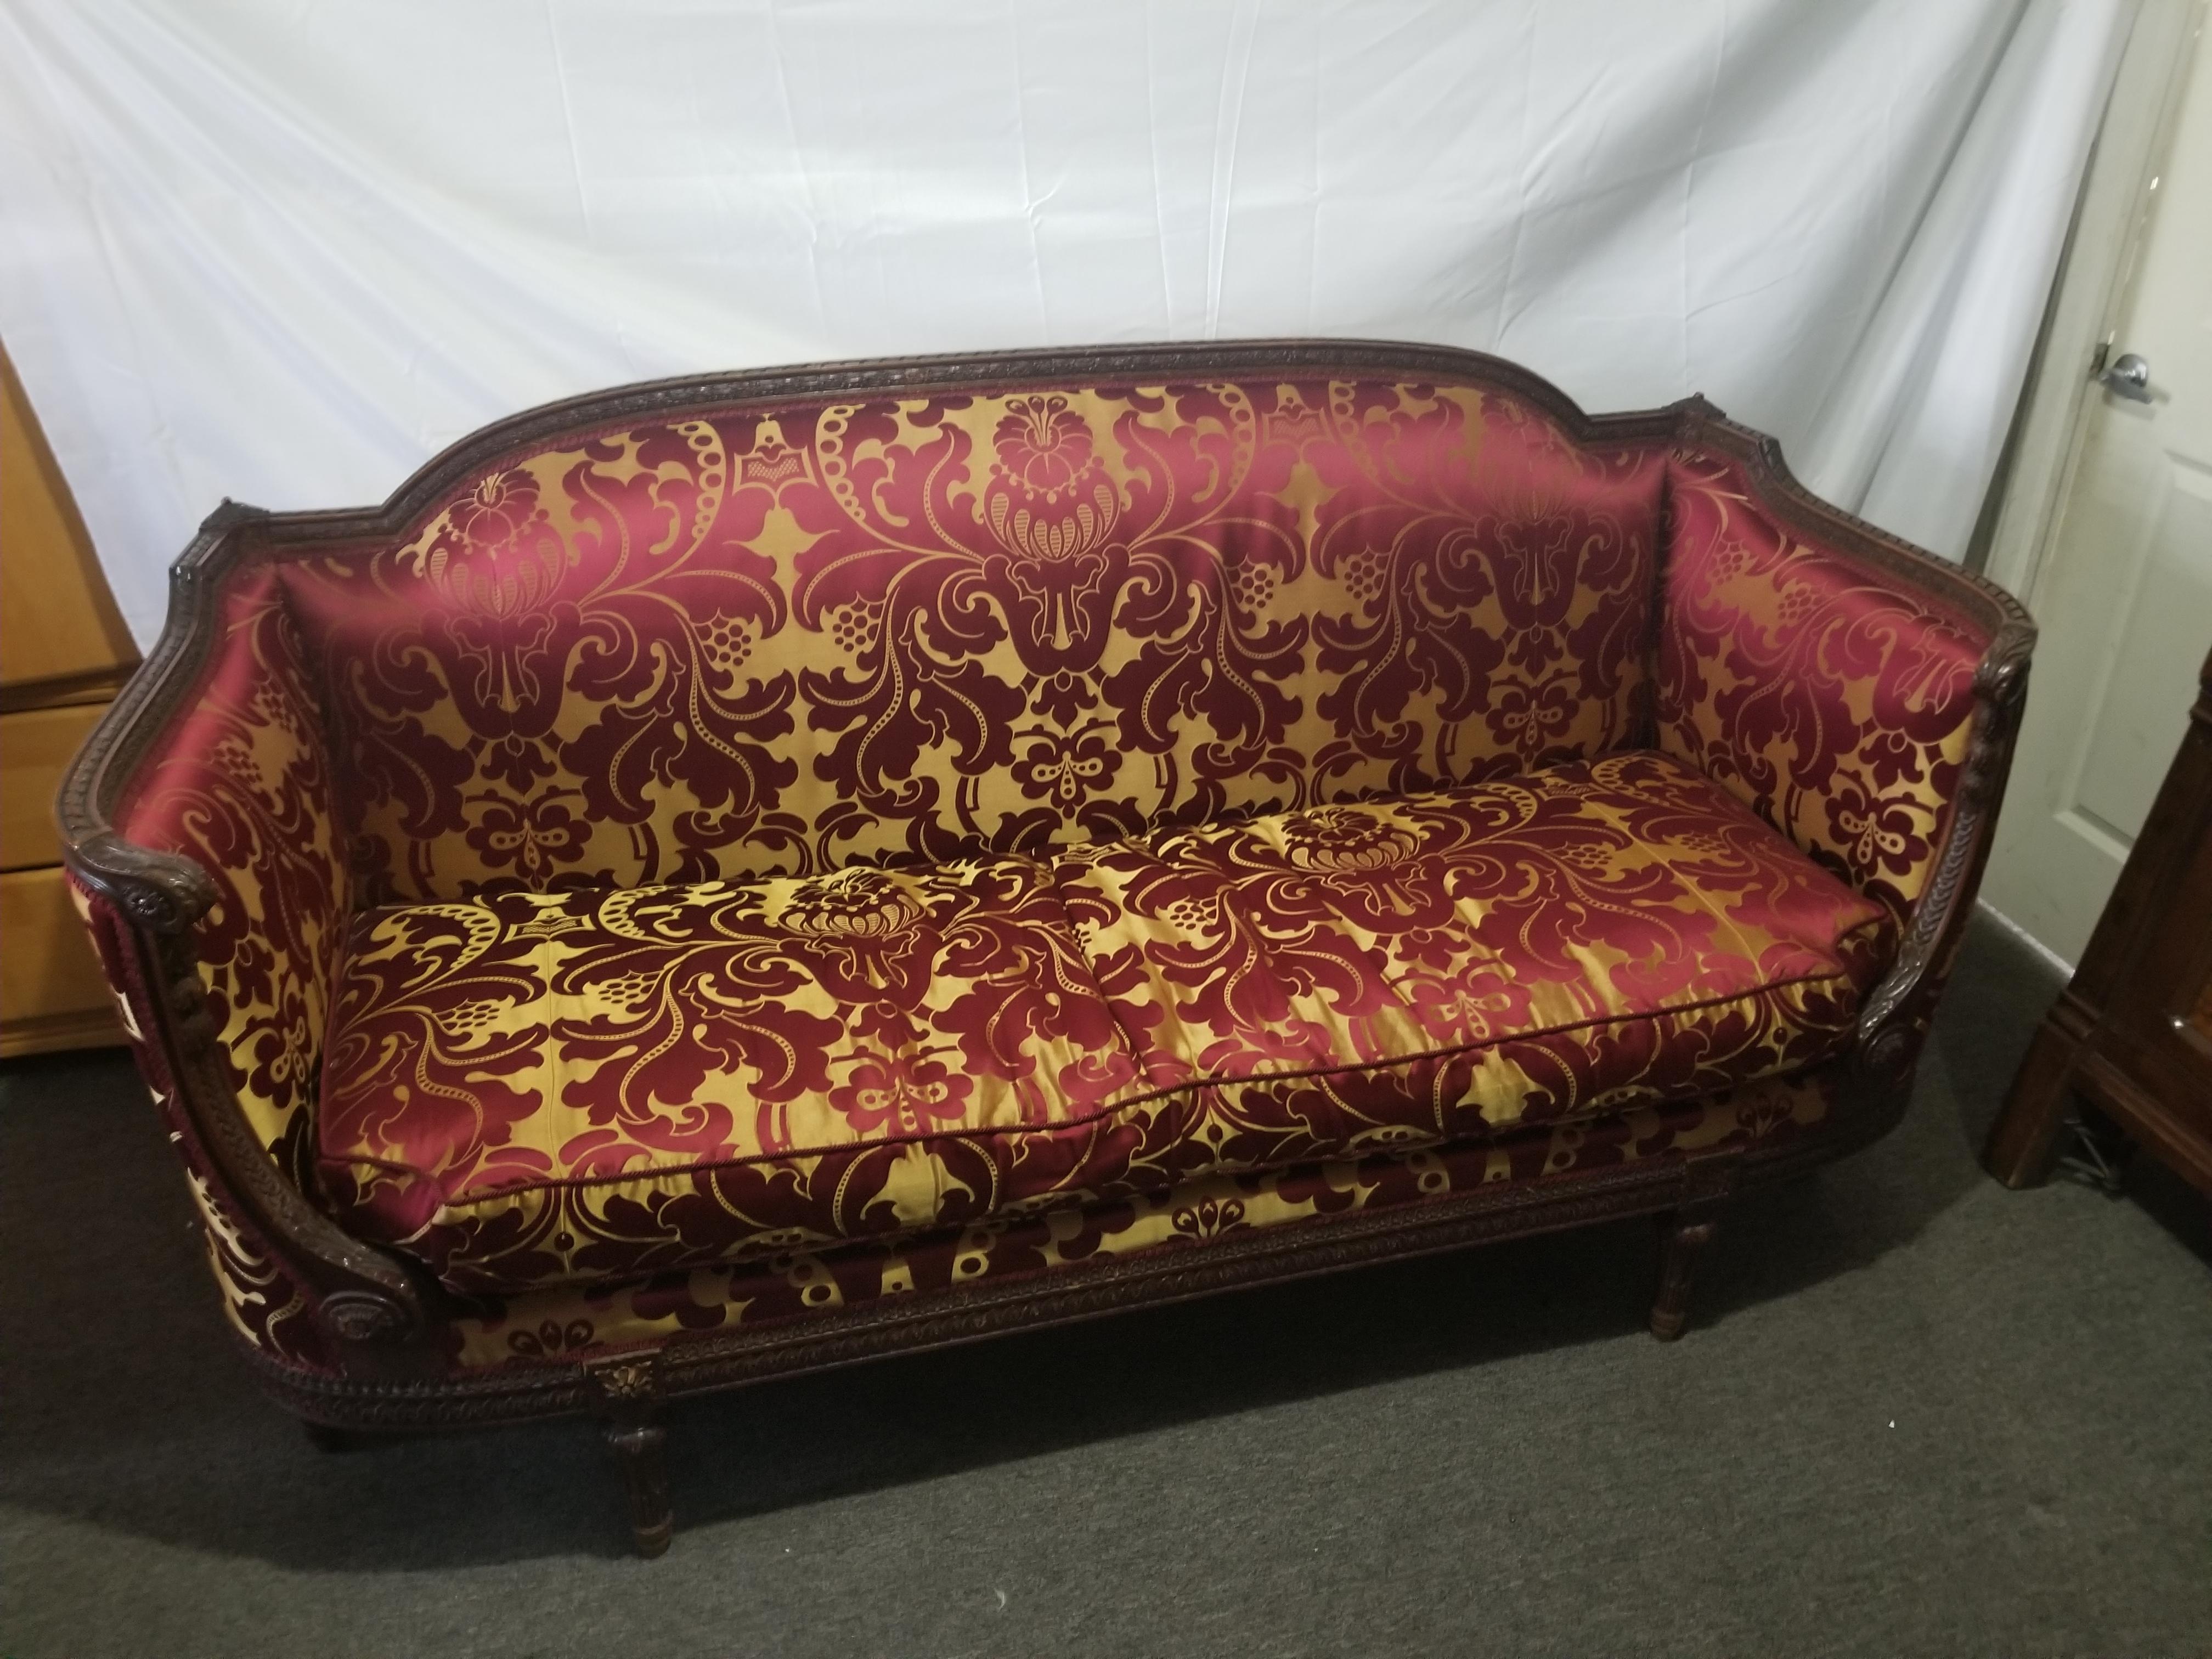 Antique French Louis XVI style carbed walnut frame sofa, circa 1860. The six Legget box form with swelled crest rail, two high inverted arms terminating in scrolled hand and styles with rosettes. Carved apron with guilloche bands, to six tapered